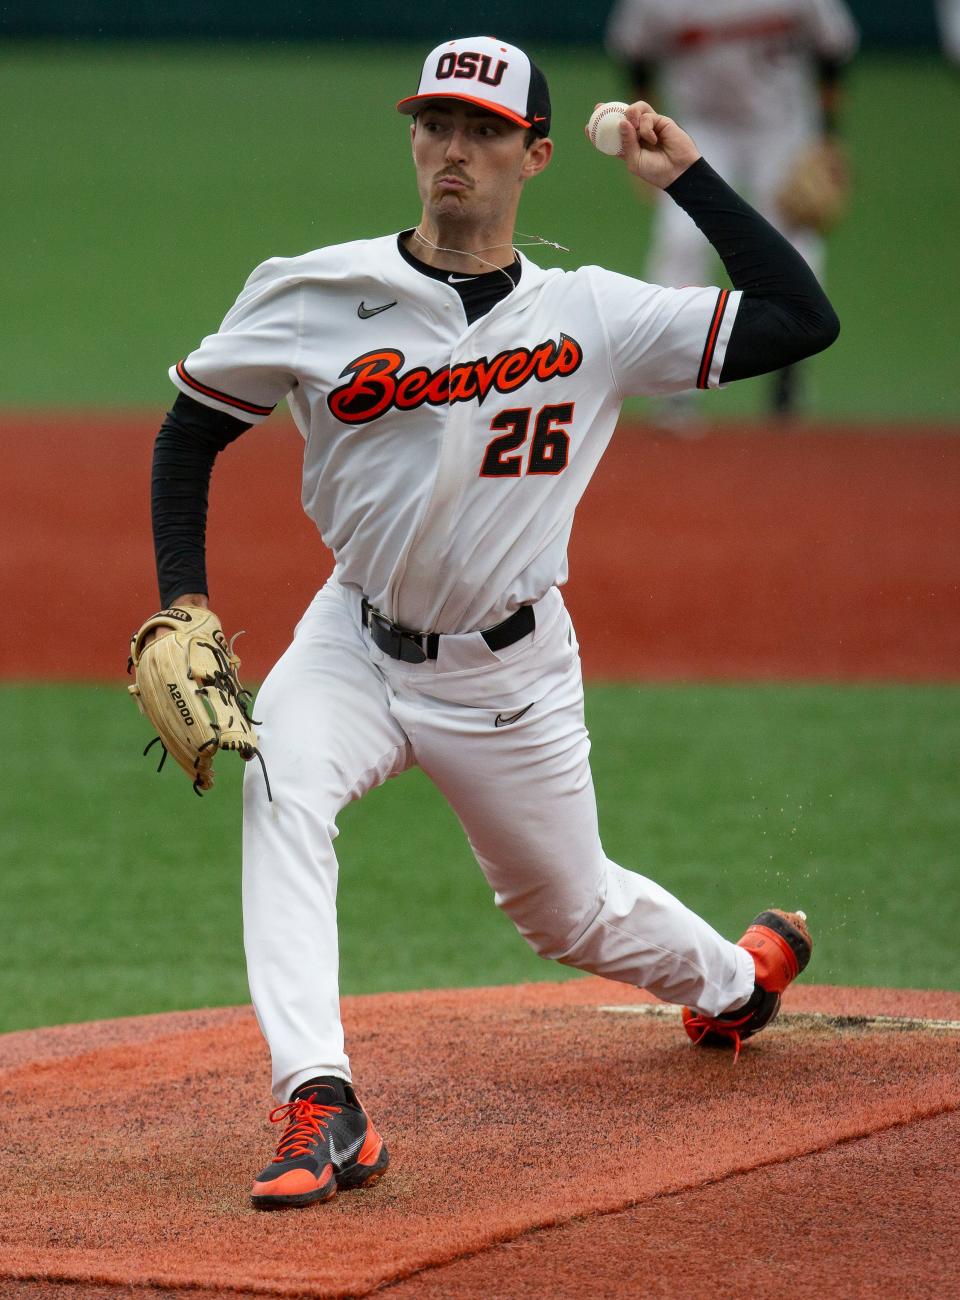 Oregon State pitcher Cooper Hjerpe throws out a pitch during the first inning against New Mexico State at the 2022 NCAA Corvallis Regional Friday, June 3, 2022, in Corvallis, Oregon. 